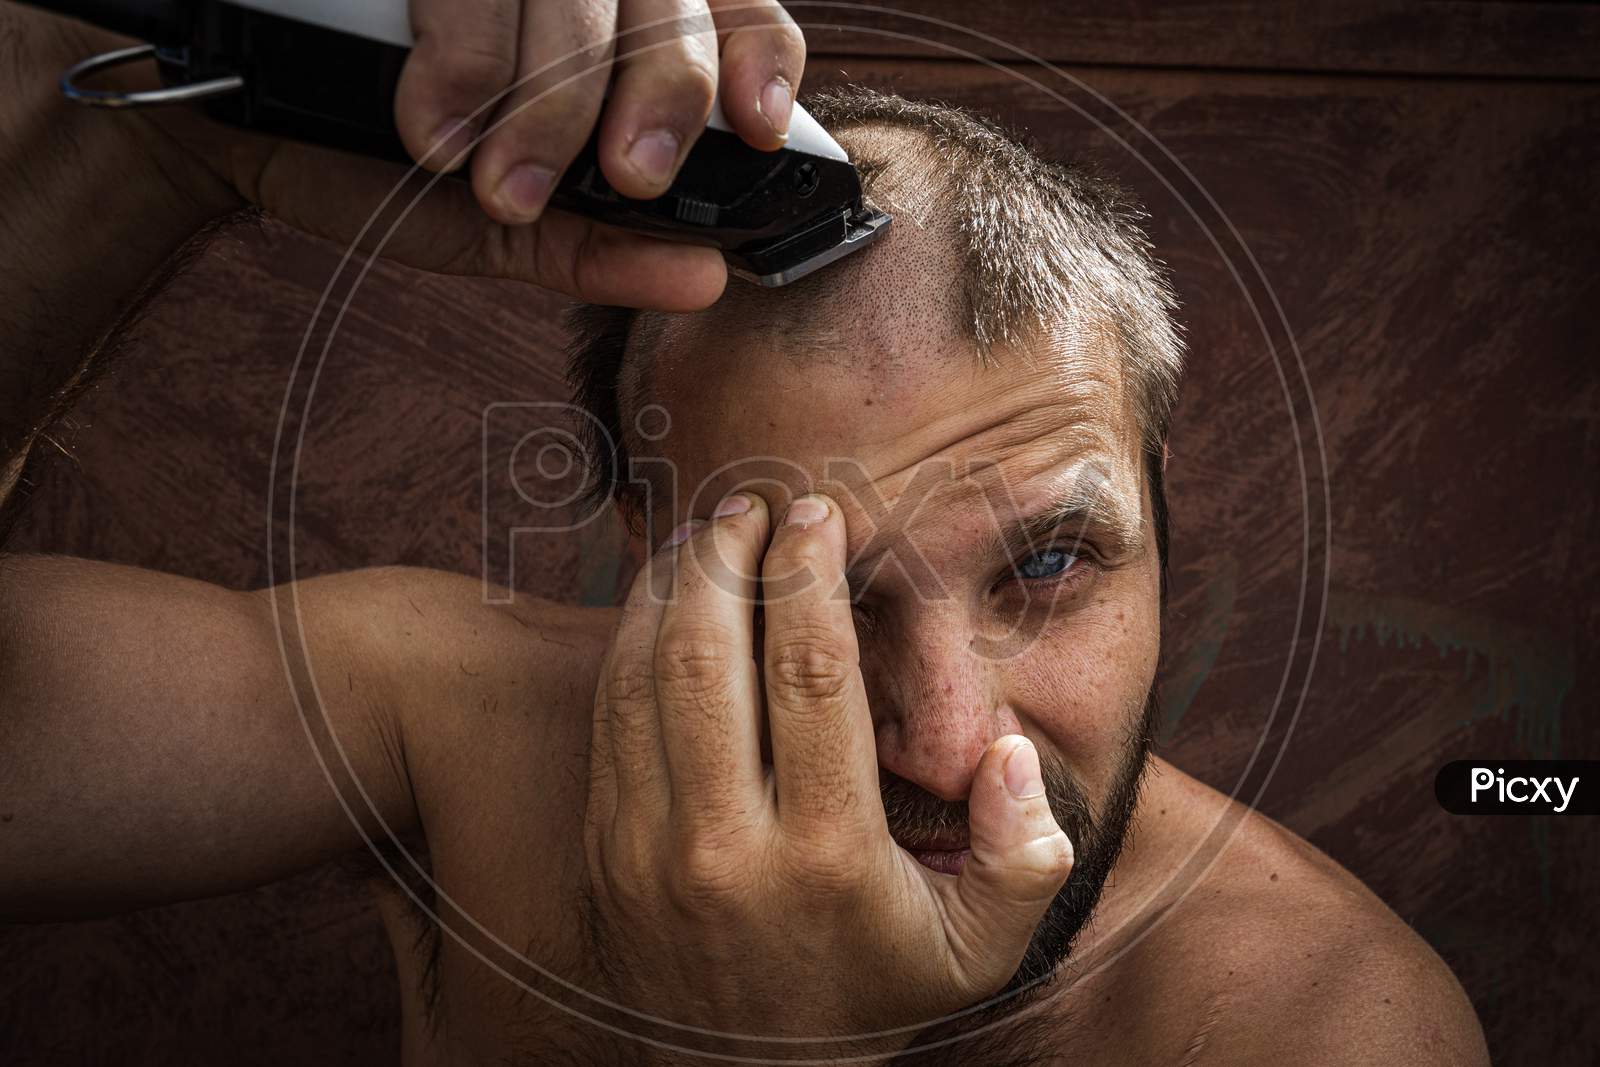 Close-Up Portrait Of Handsome Shirtless Man Shaving His Head With An Electric Razor  Against Brutal Background. Concept Of Male Home Care Without Beauty Salons